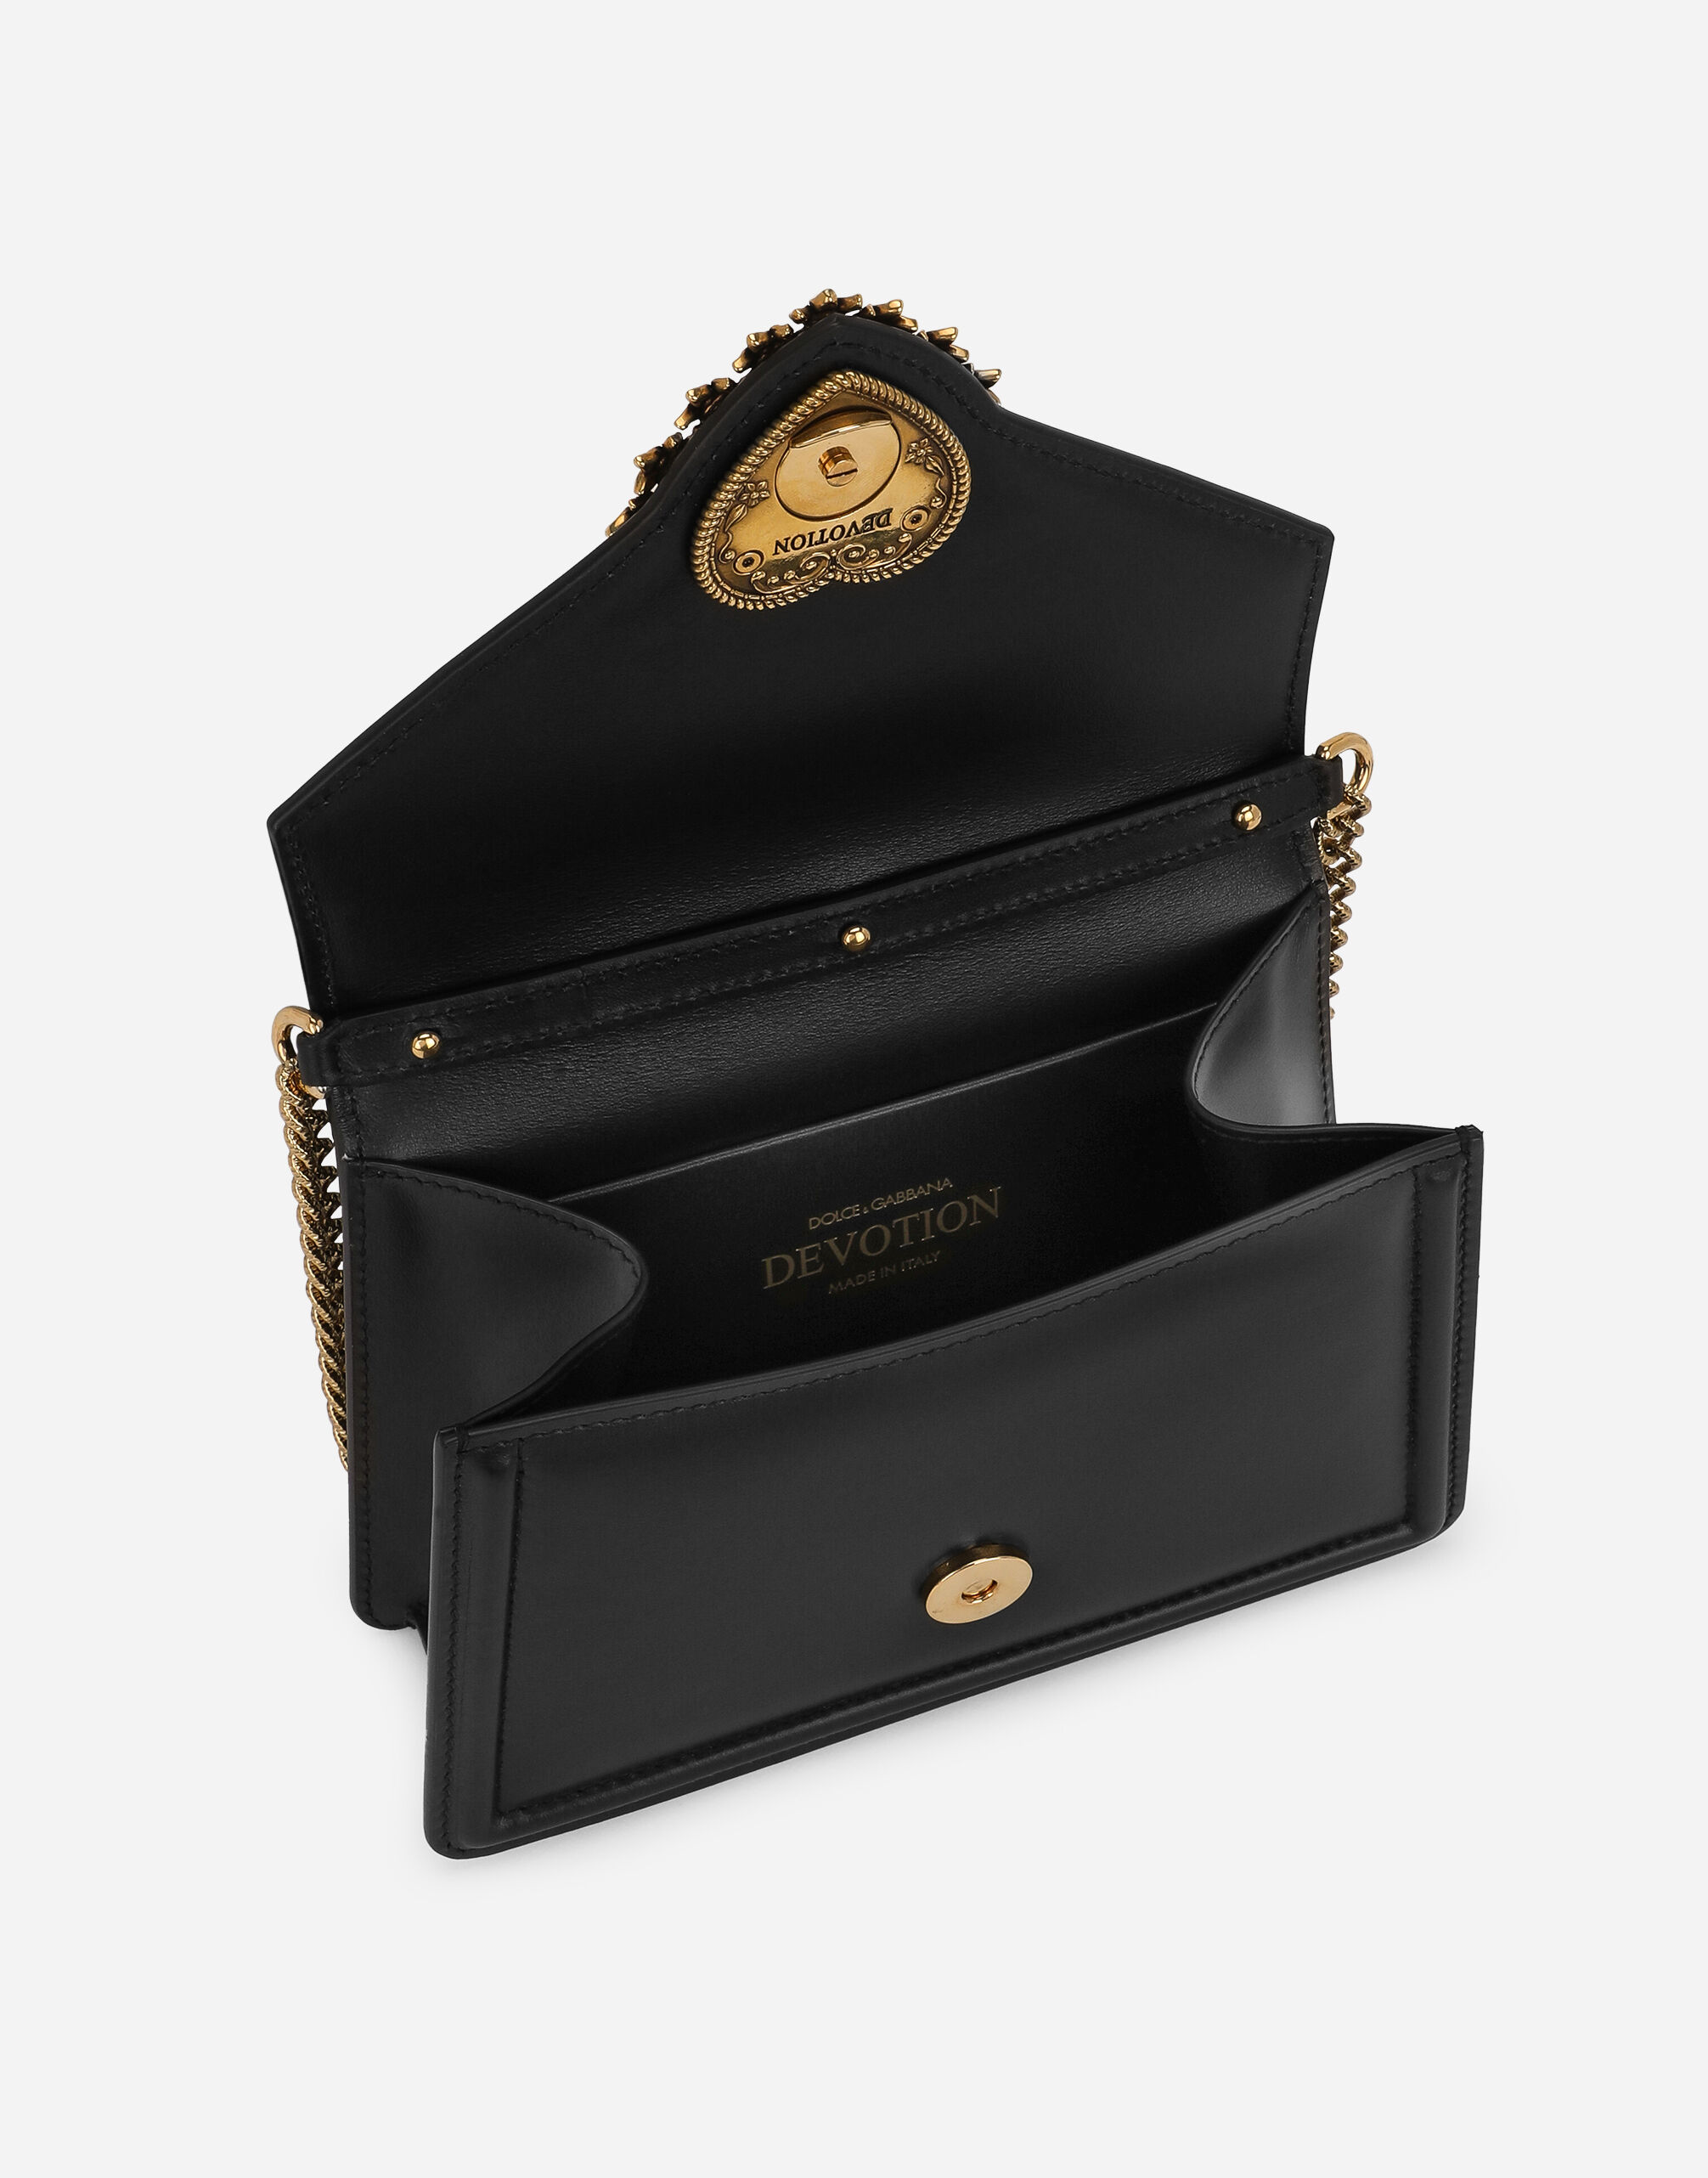 Small Devotion top-handle bag in BLACK for | Dolceu0026Gabbana® US